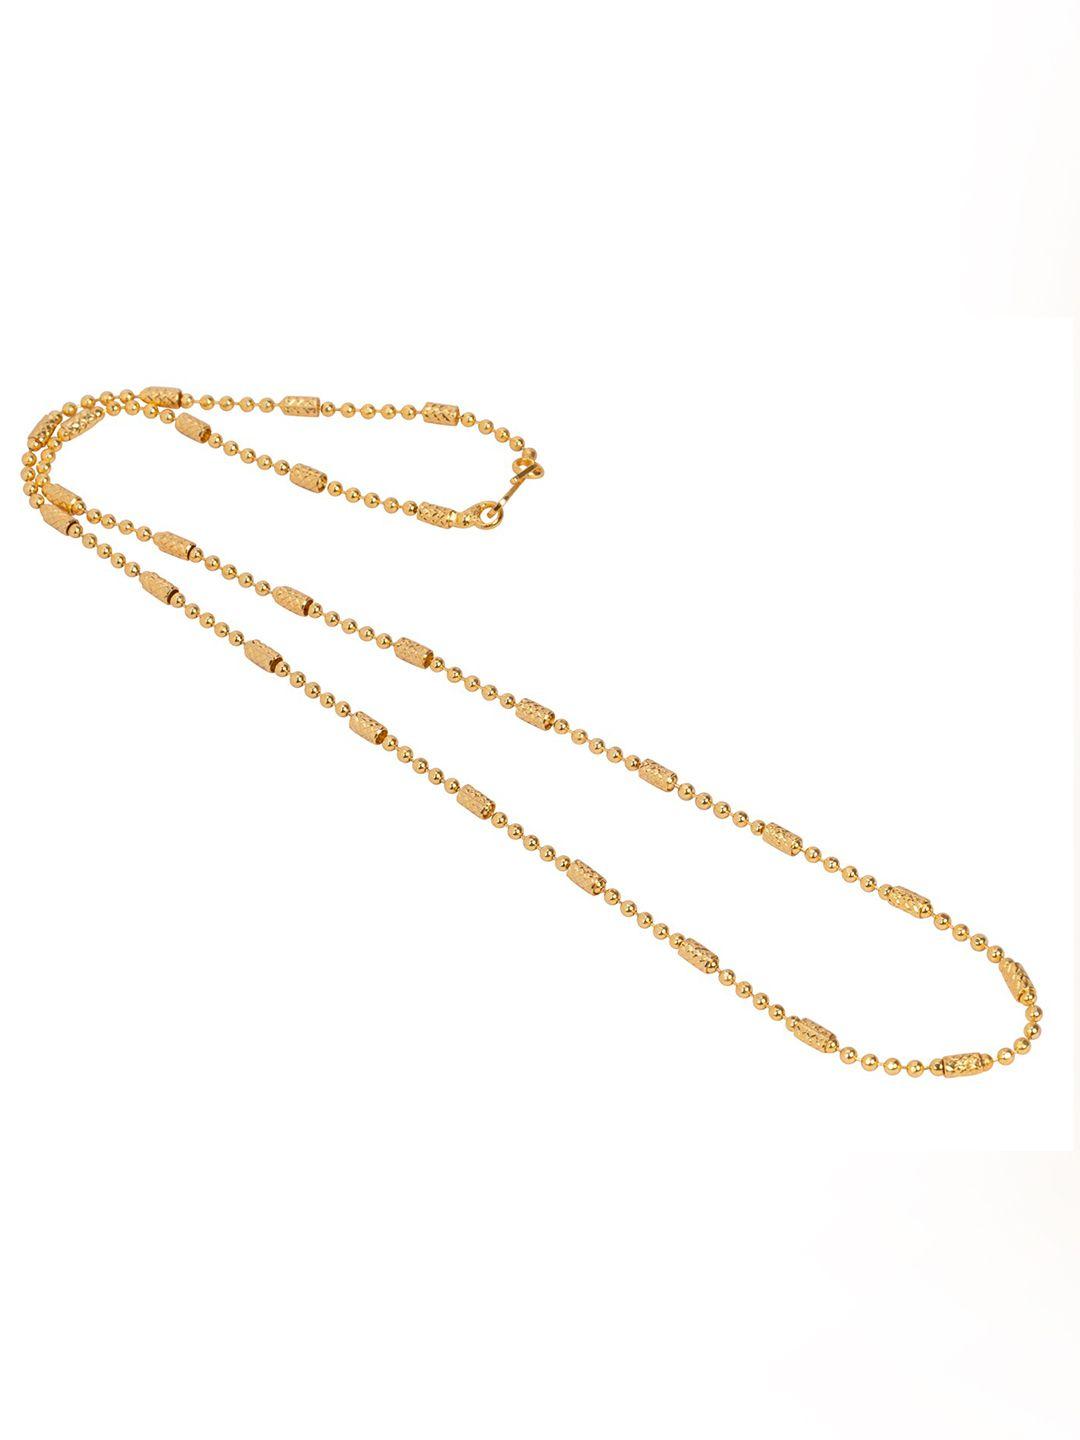 aanyacentric brass gold-plated handcrafted chain